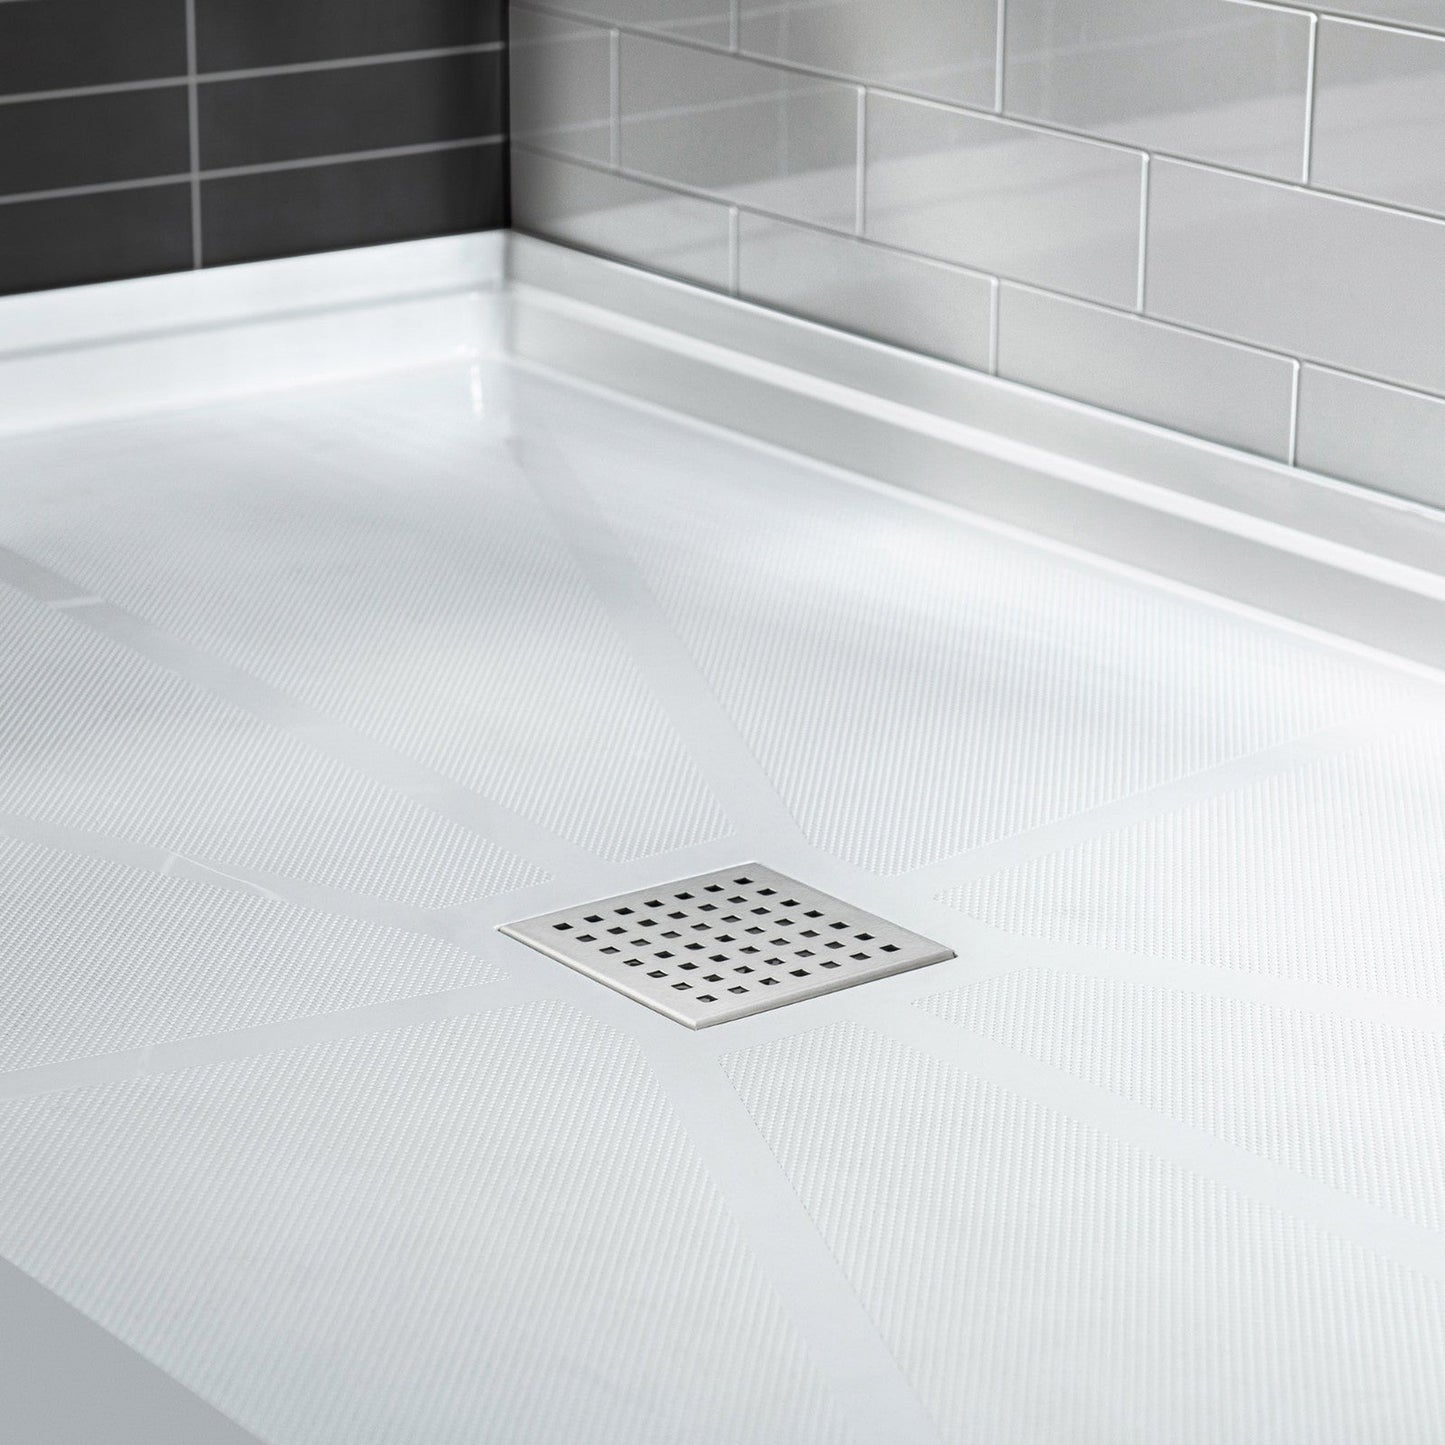 WoodBridge 60" x 34" White Solid Surface Shower Base Center Drain Location With Brushed Nickel Trench Drain Cover